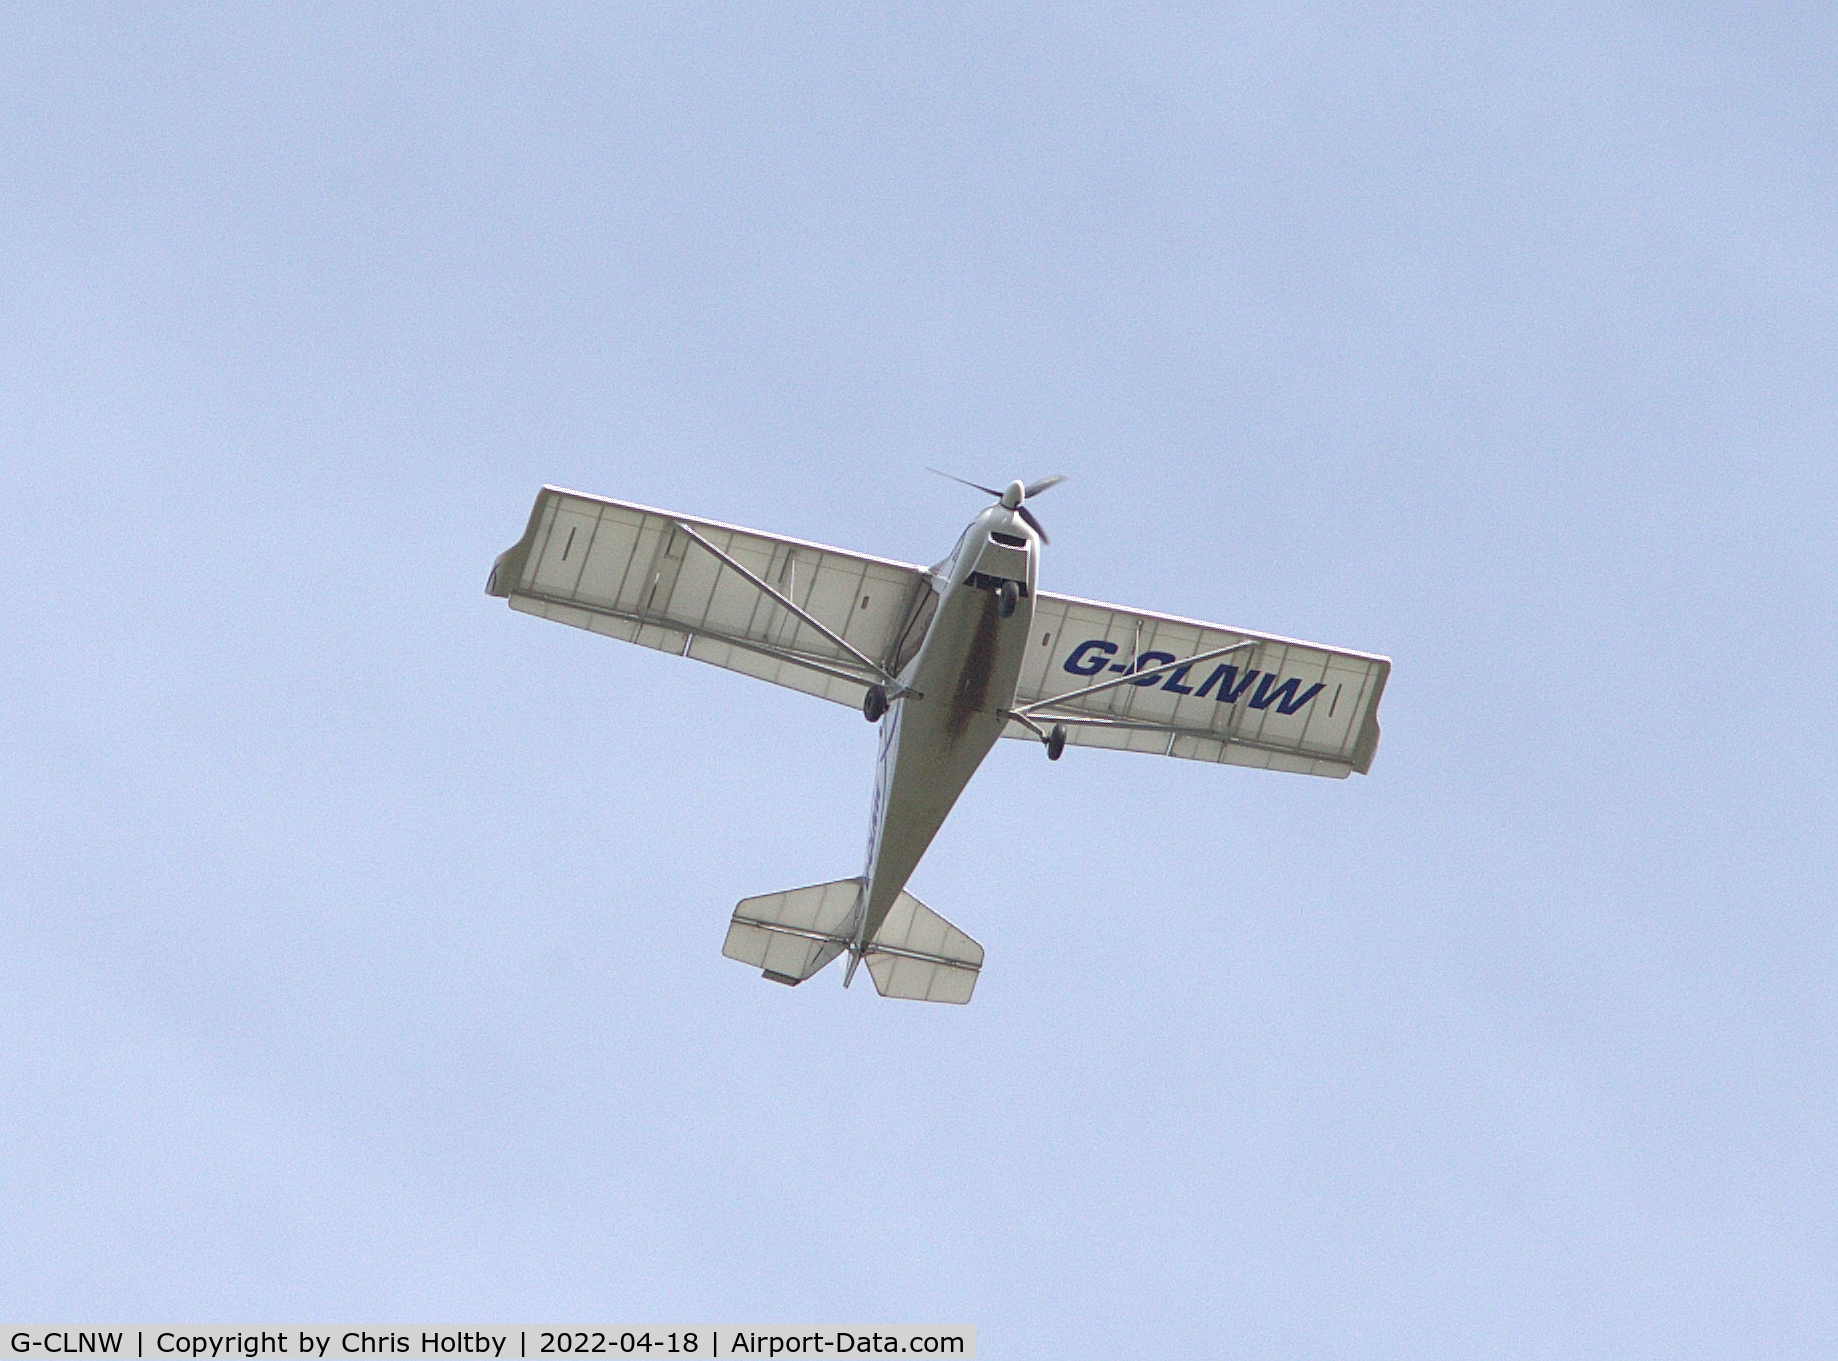 G-CLNW, 2020 Best Off Skyranger Nynja 912S(1) C/N BMAA/HB/722, Over Potters Bar, Herts